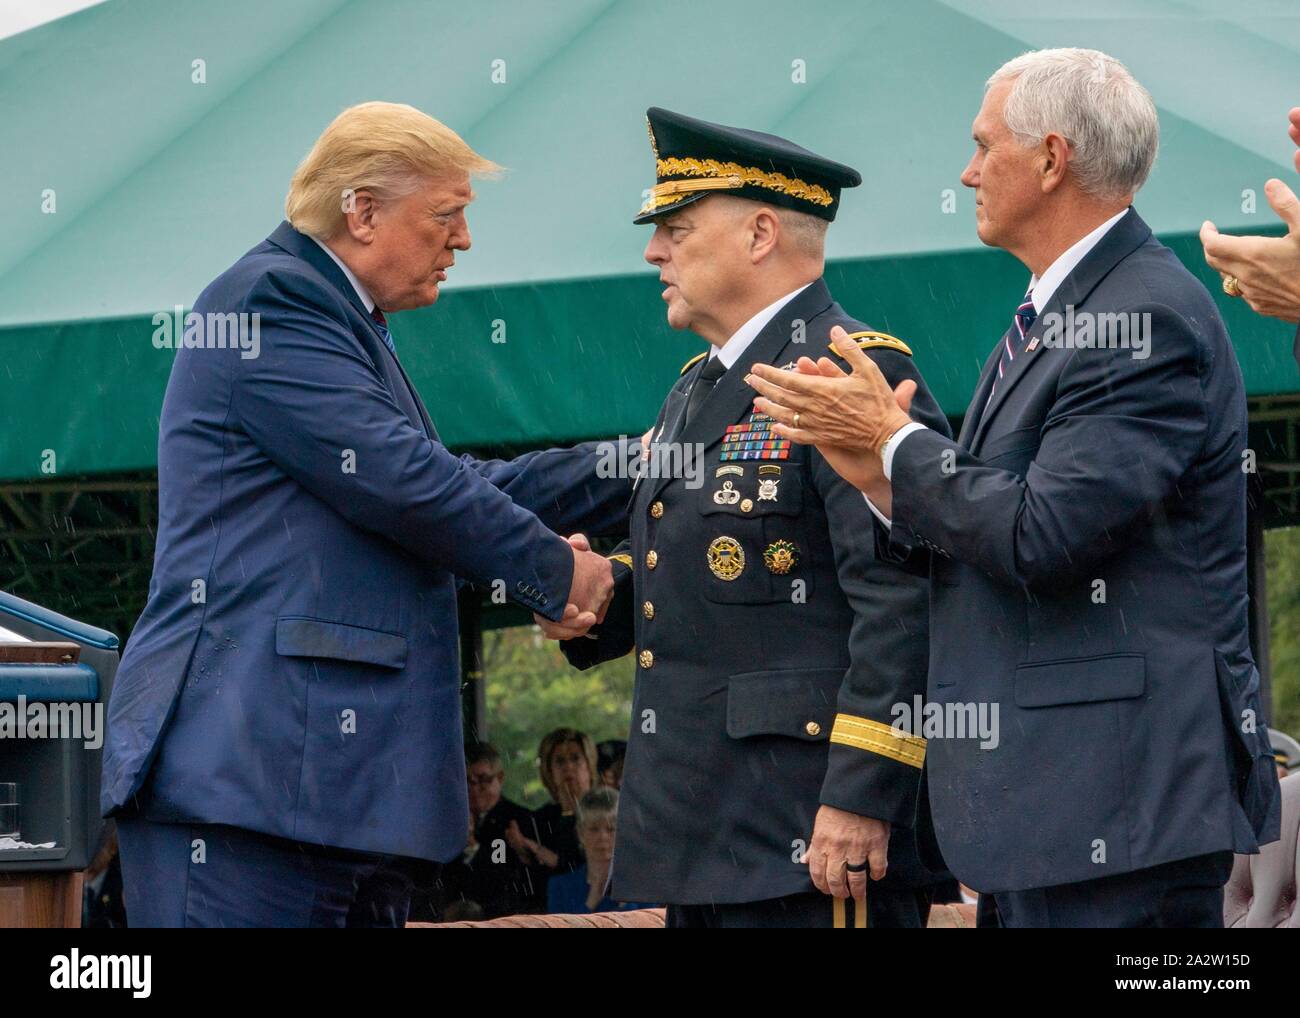 U.S President Donald Trump, left, congratulates incoming Chairman Gen. Mark Milley, center, as Vice President Mike Pence looks on, during a ceremony marking the retirement of outgoing Chairman of the Joint Chiefs Gen. Joseph Dunford and the elevation of Milley at Summerall Field, Joint Base Myer-Henderson Hall September 30, 2019 in Arlington, Virginia. Stock Photo